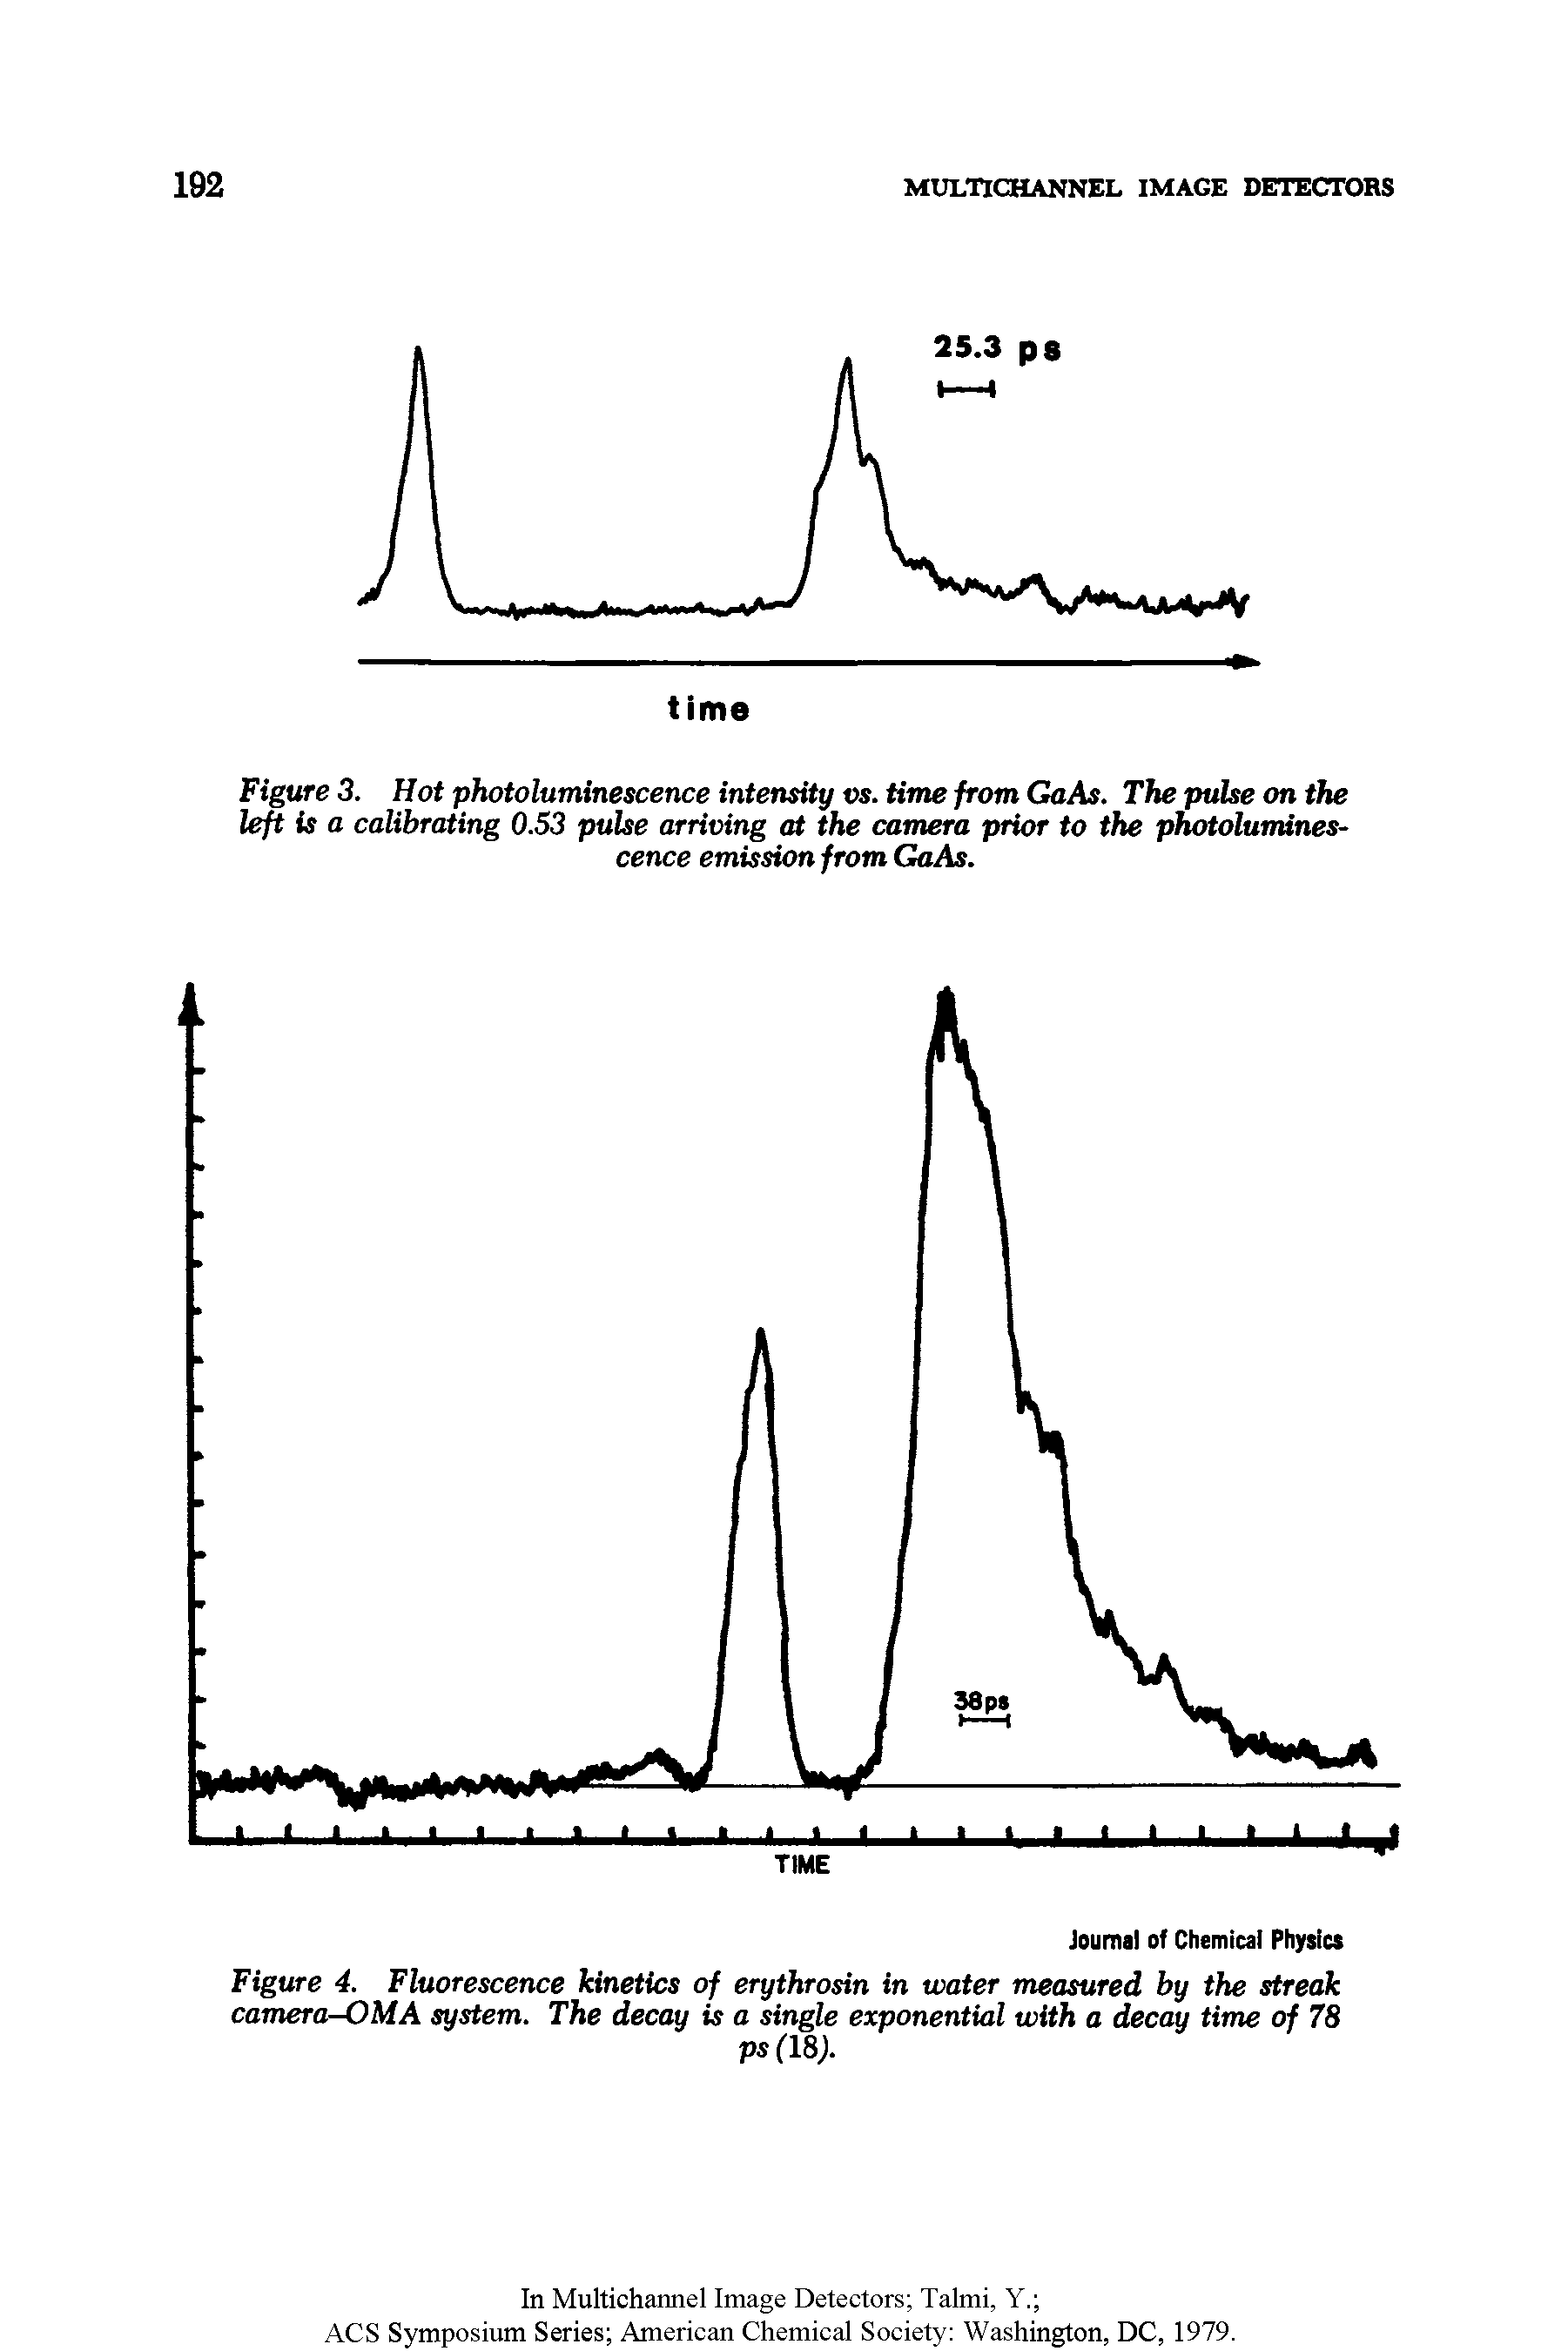 Figure 4. Fluorescence kinetics of erythrosin in water measured by the streak camera-OMA system. The decay is a single exponential with a decay time of 78...